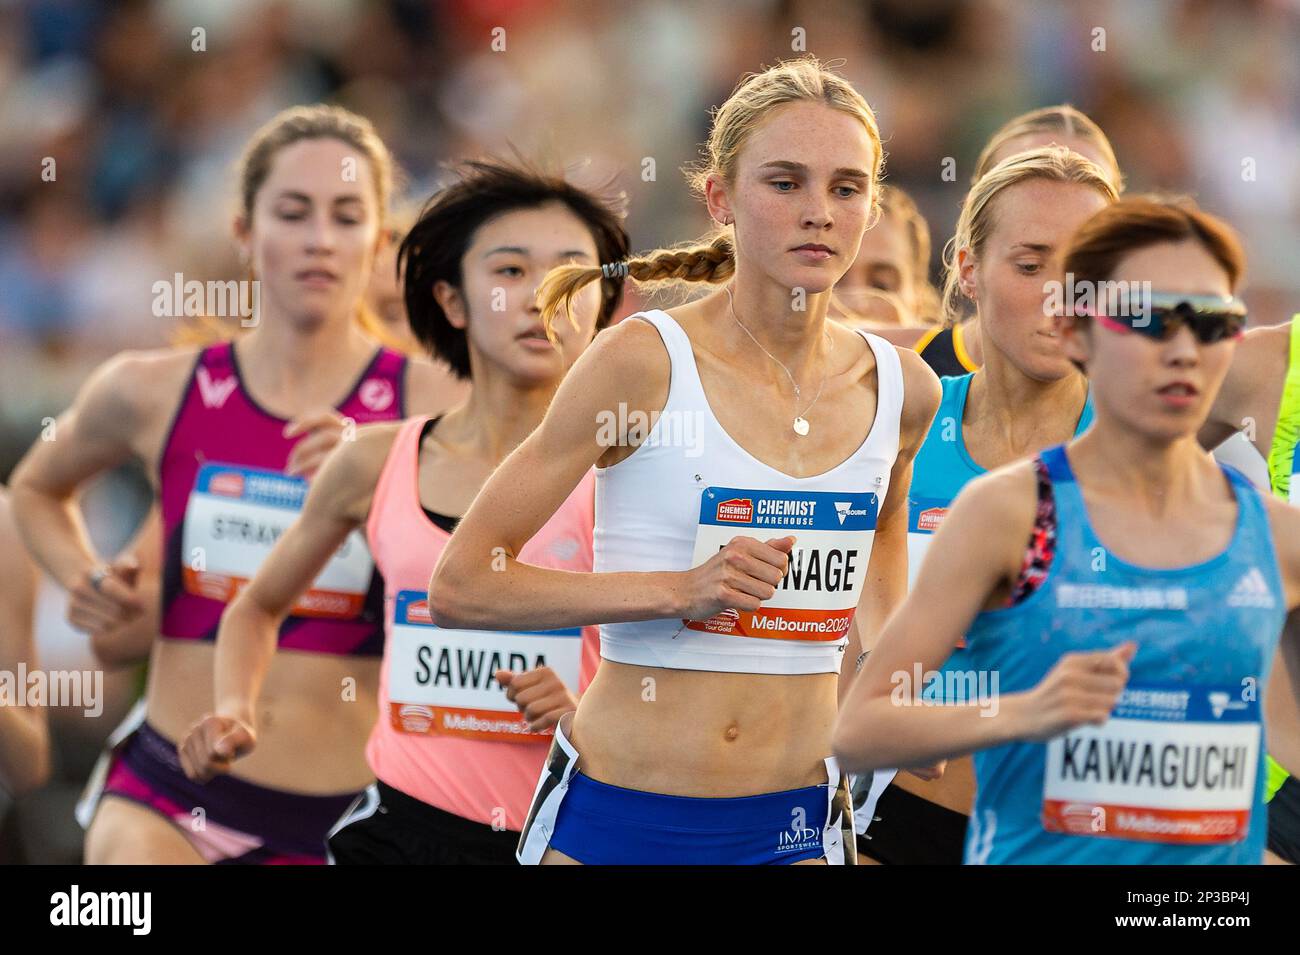 Opening stages of the Women’s 3000m at the Maurie Plant Meet held at Lakeside Stadium, Melbourne on 23/02/23. Stock Photo